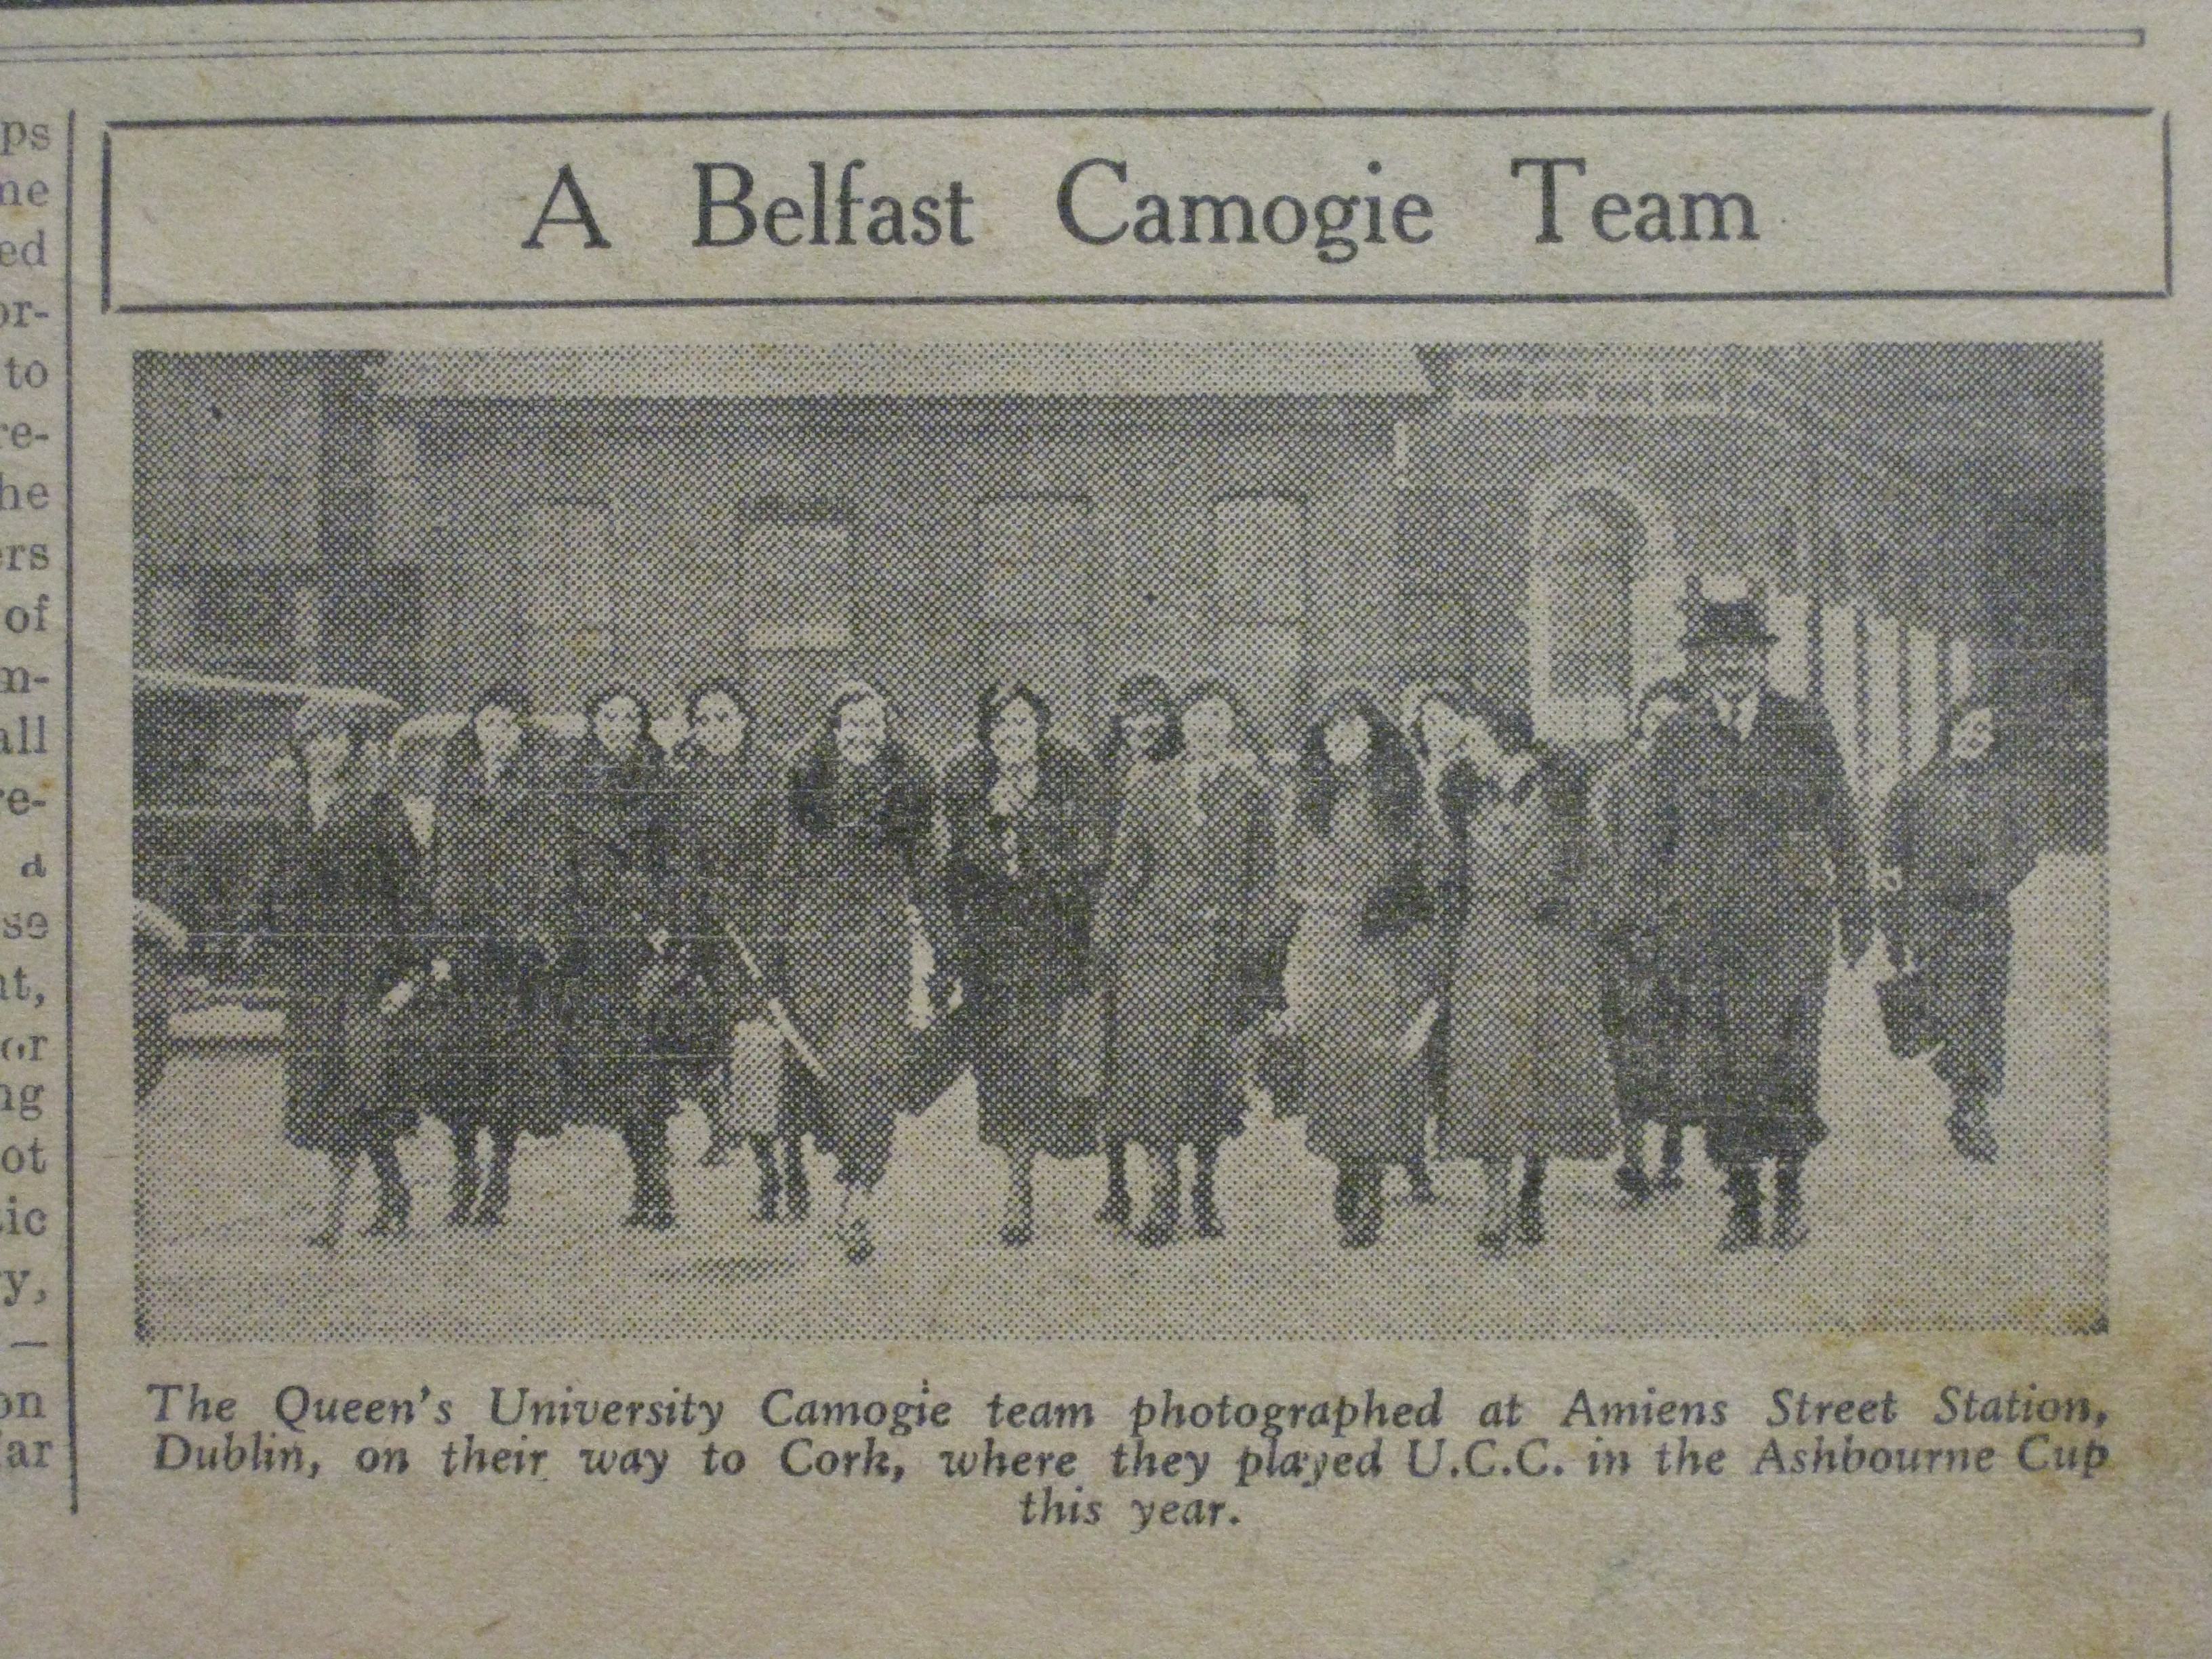 The Queen's University Camogie Team, pictured at Amiens Street Station, Dublin, on their way to play Cork in the Ashbourne Cup, 1934.